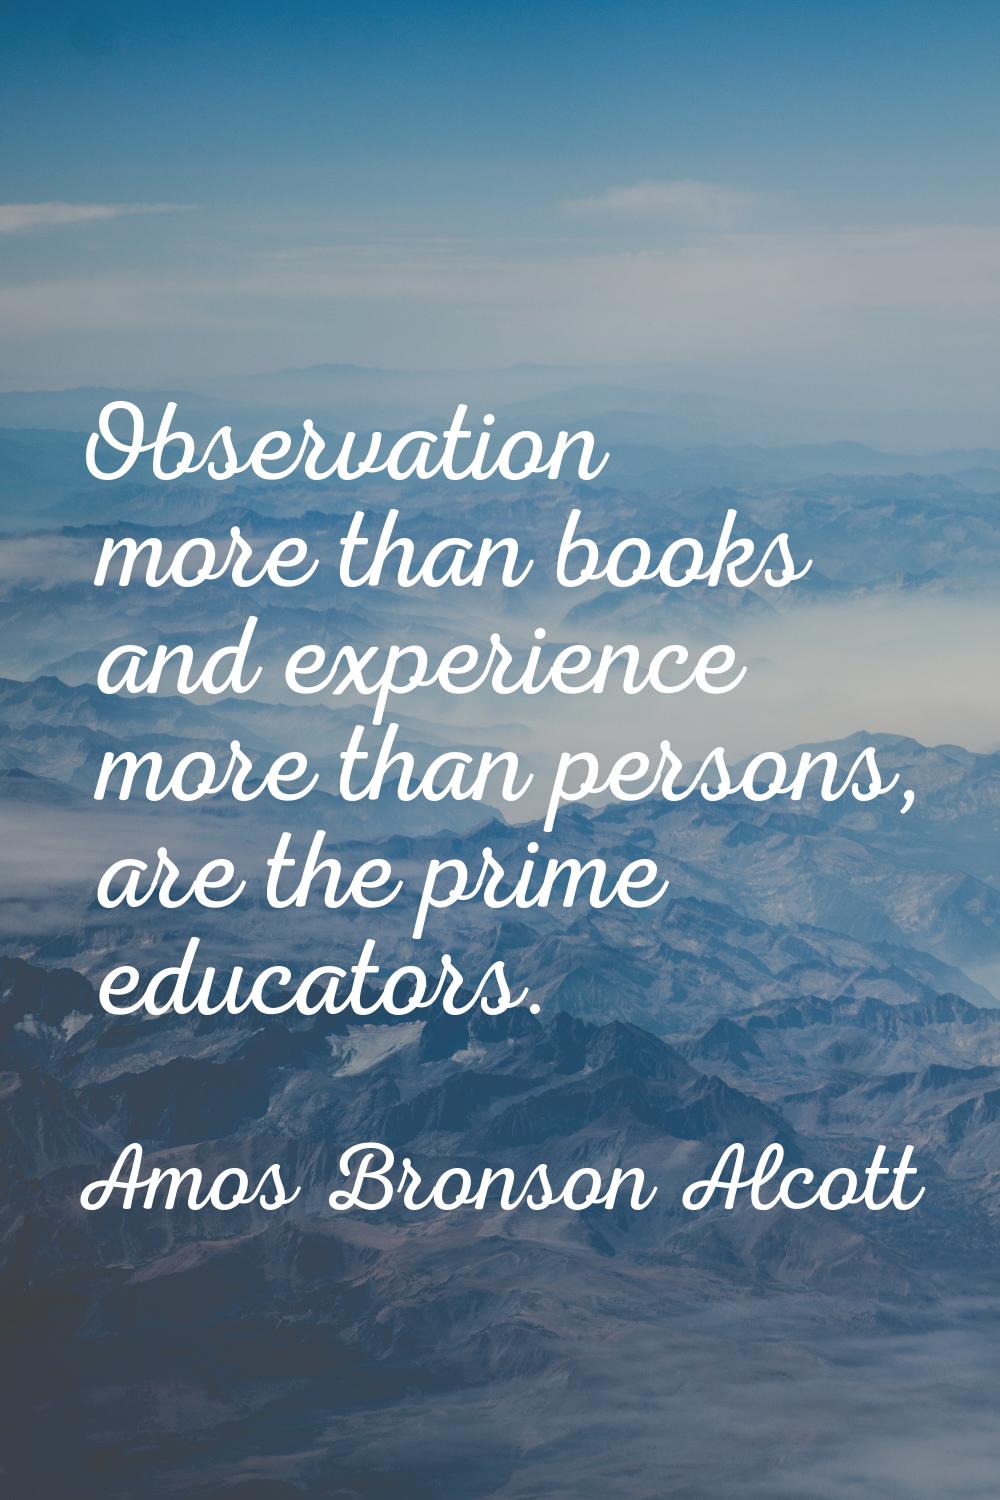 Observation more than books and experience more than persons, are the prime educators.